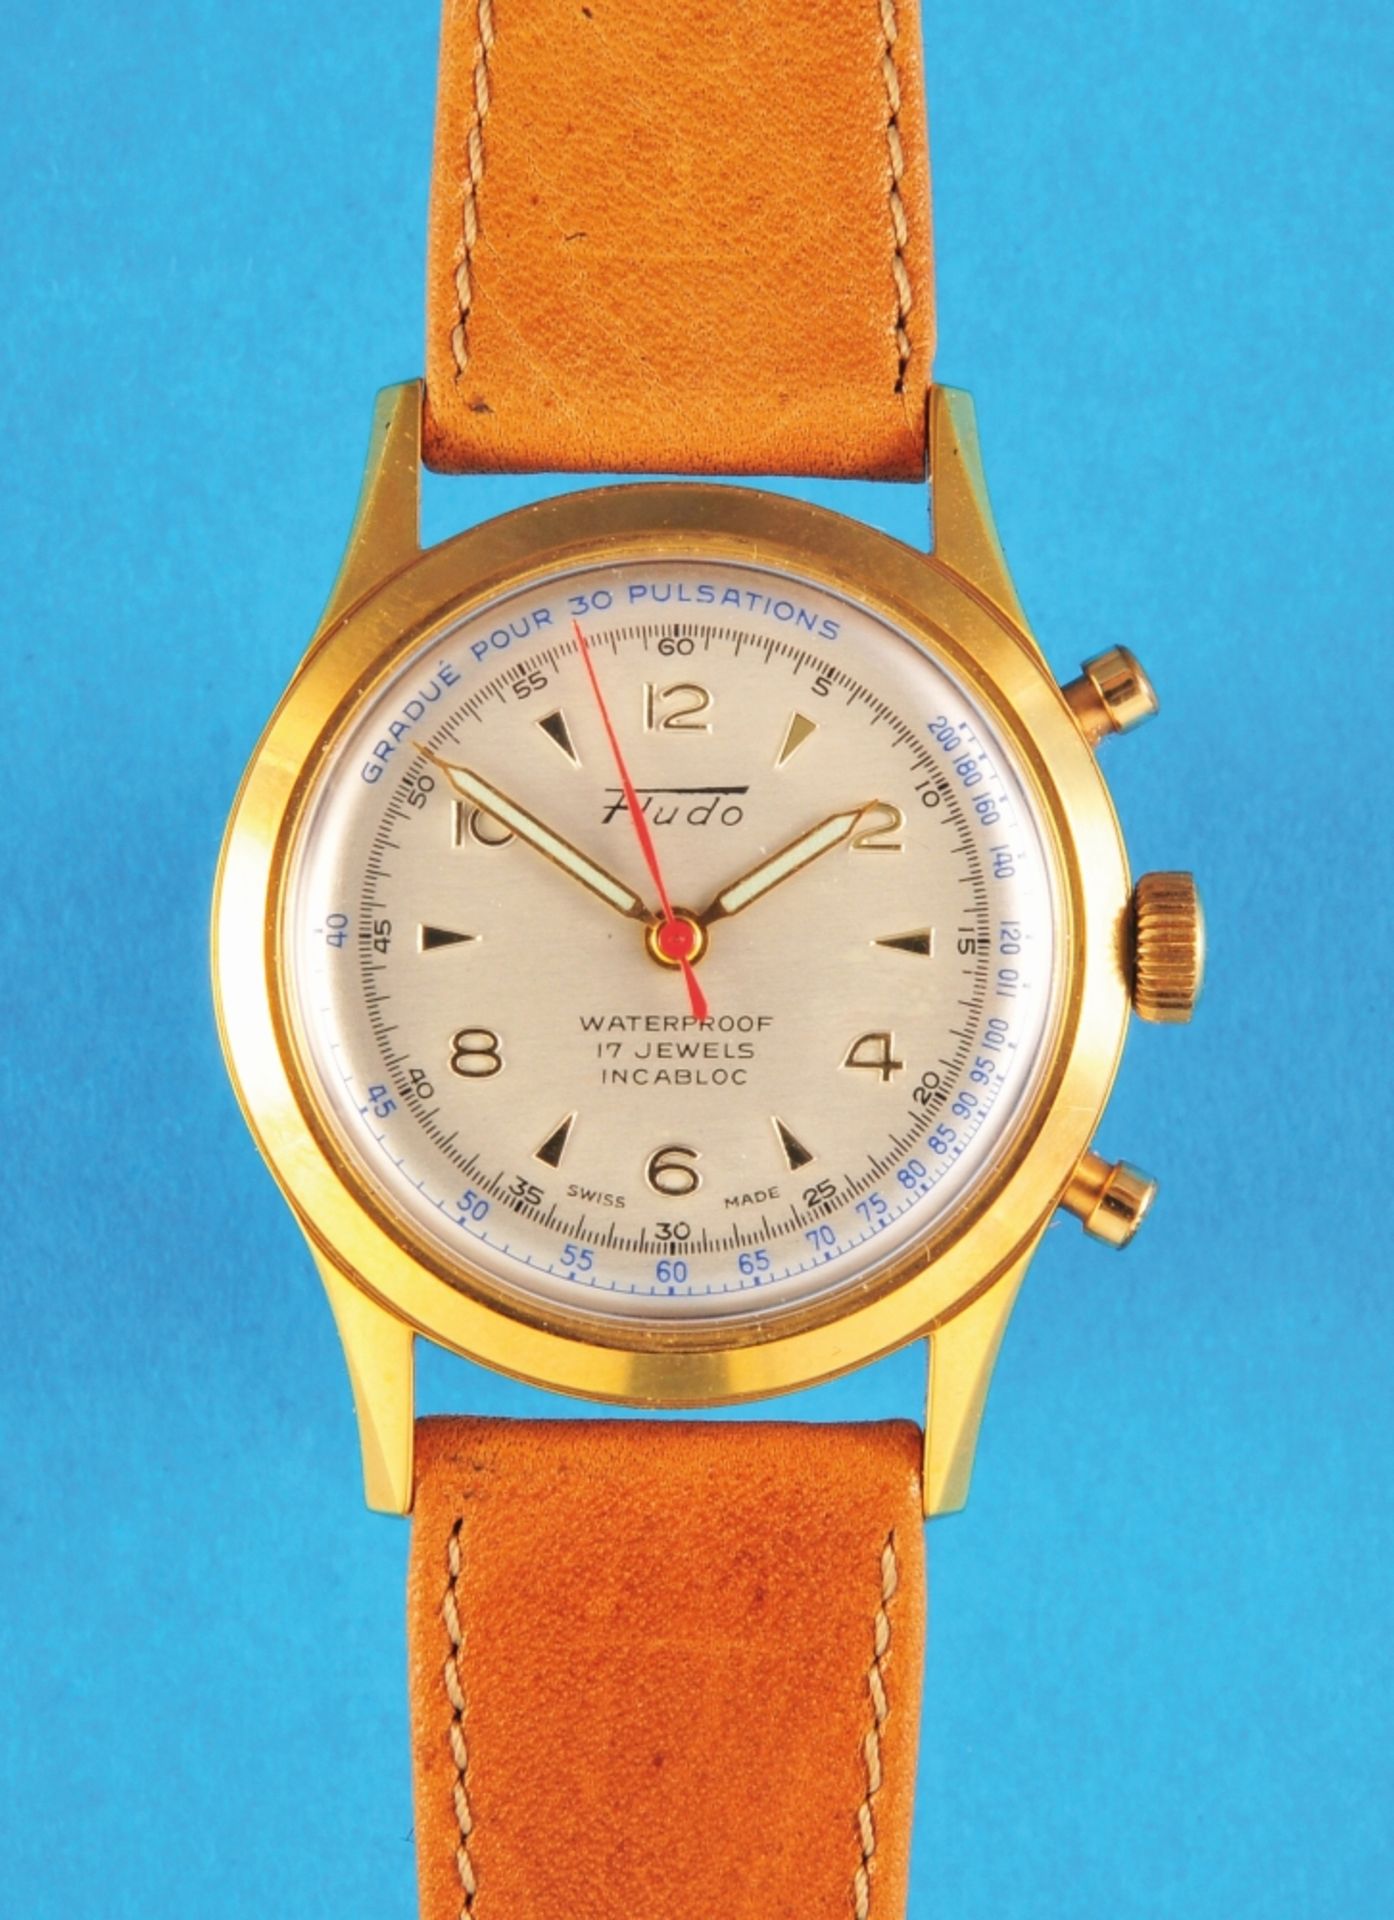 Fludo wristwatch with flyback chronograph, simple manual winding chronograph, ref. 810, approx. ETA 